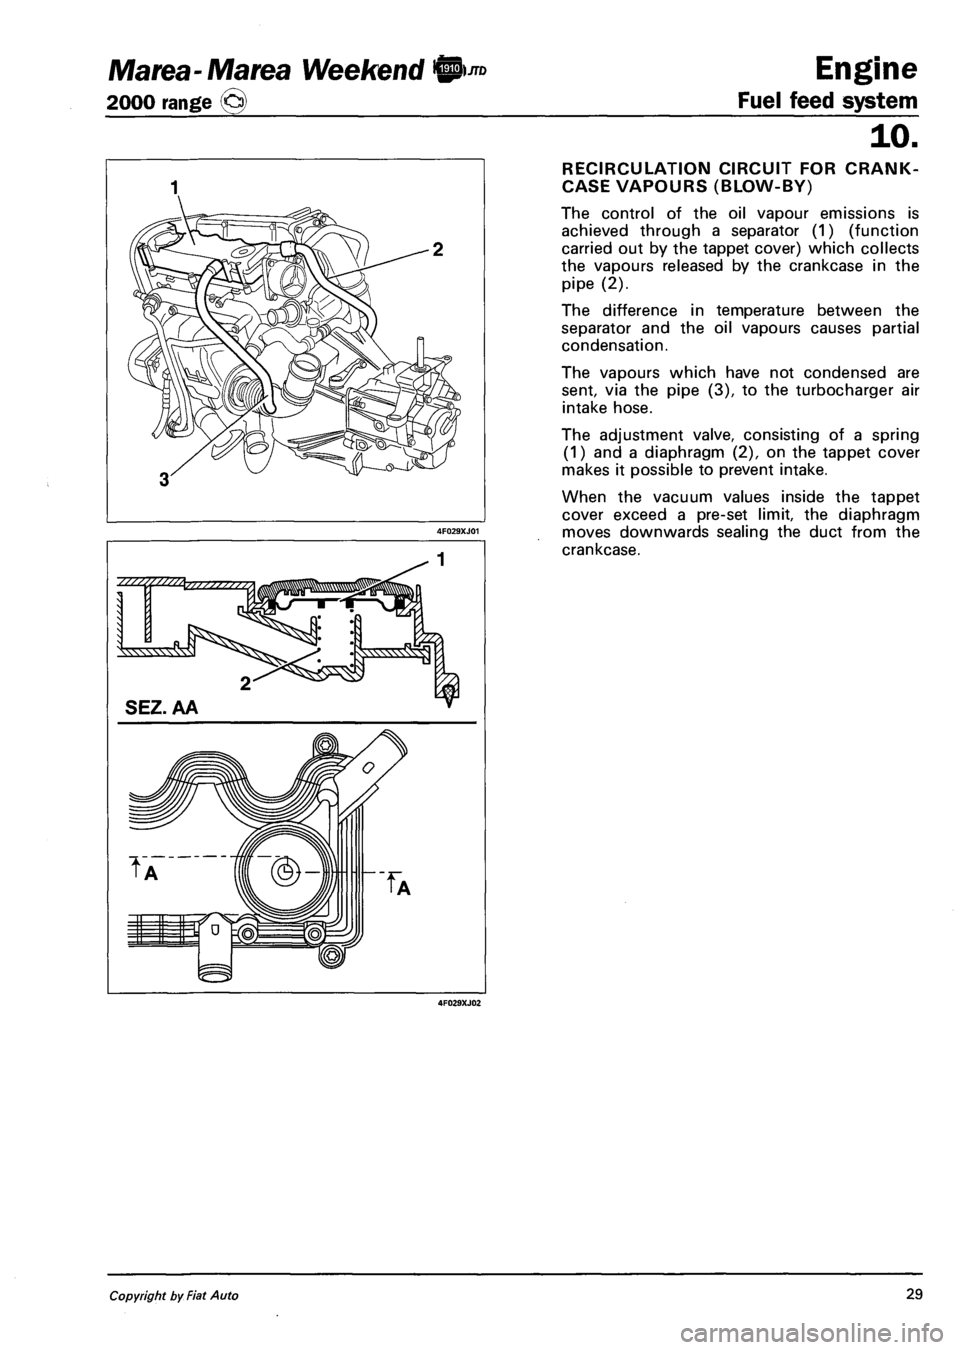 FIAT MAREA 2001 1.G User Guide Marea-Marea Weekend 
2000 range (j§)  
1 
4F029XJ02 
Engine 
Fuel feed system 
10. 
RECIRCULATION CIRCUIT FOR CRANK-
CASE VAPOURS (BLOW-BY) 
The control of the oil vapour emissions is 
achieved throu